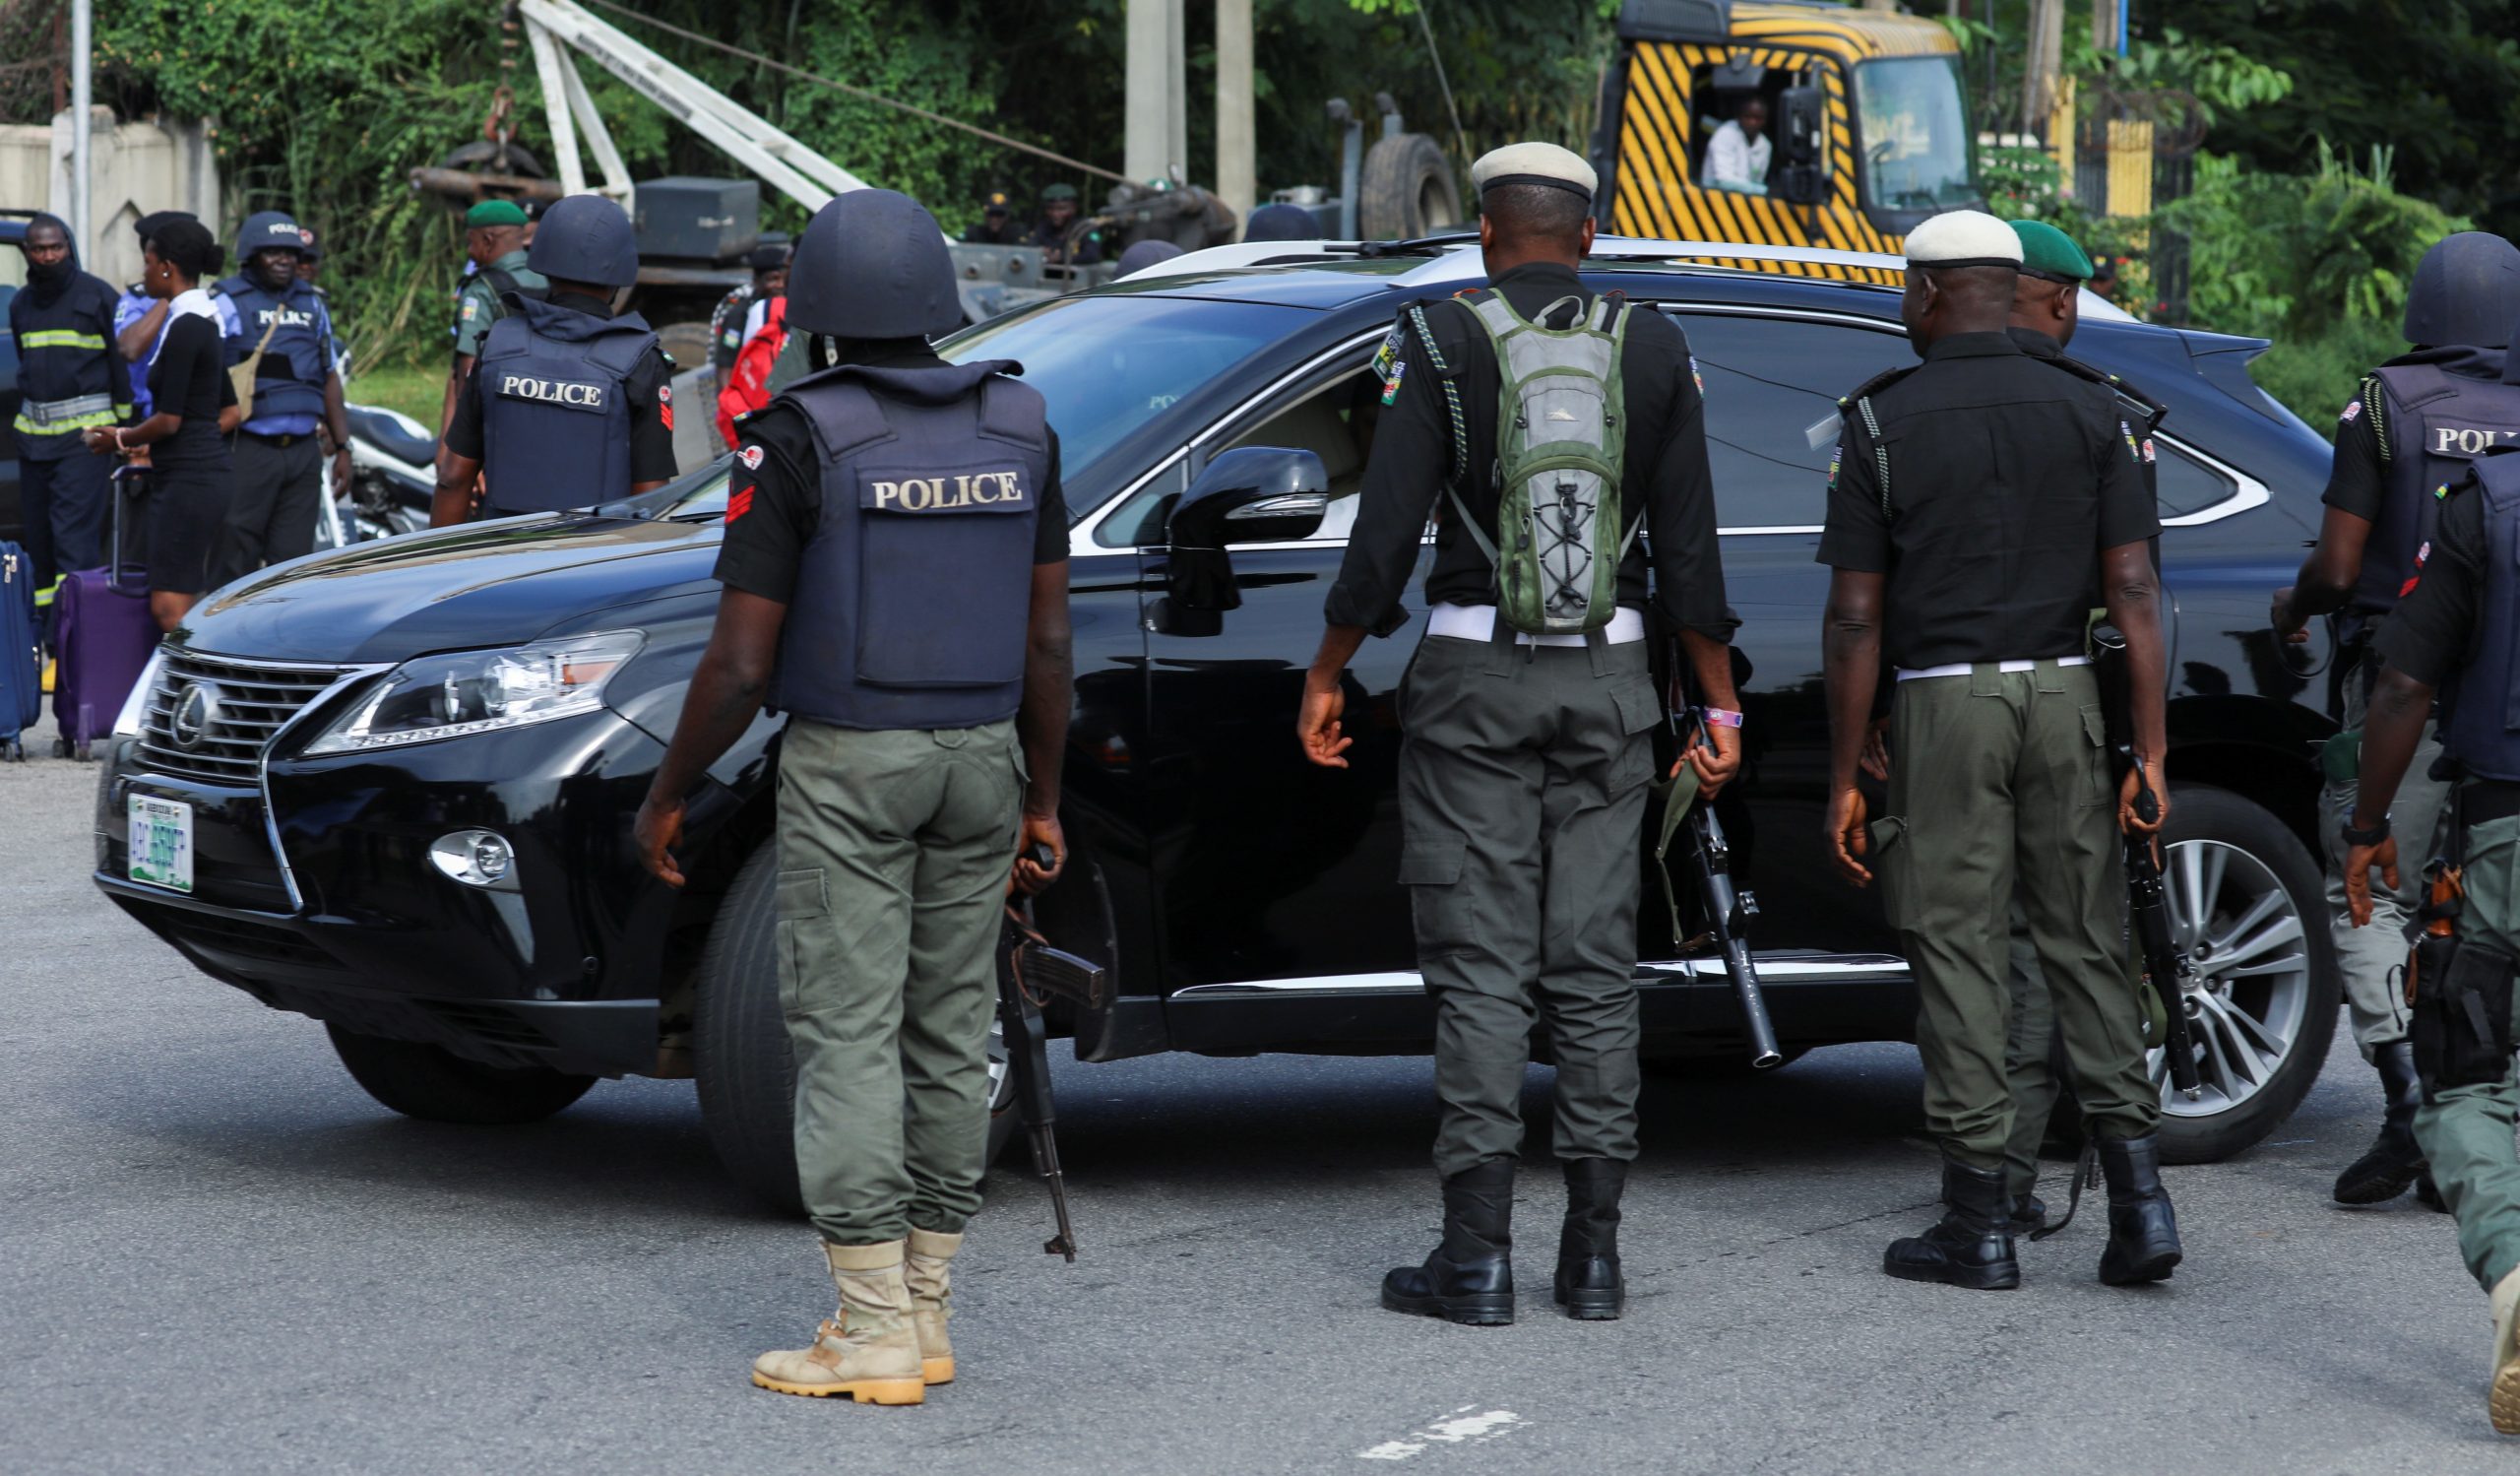 Police officers are seen conducting checks on vehicles at the Federal High court in Abuja, Nigeria October 21, 2021. REUTERS/Afolabi Sotunde